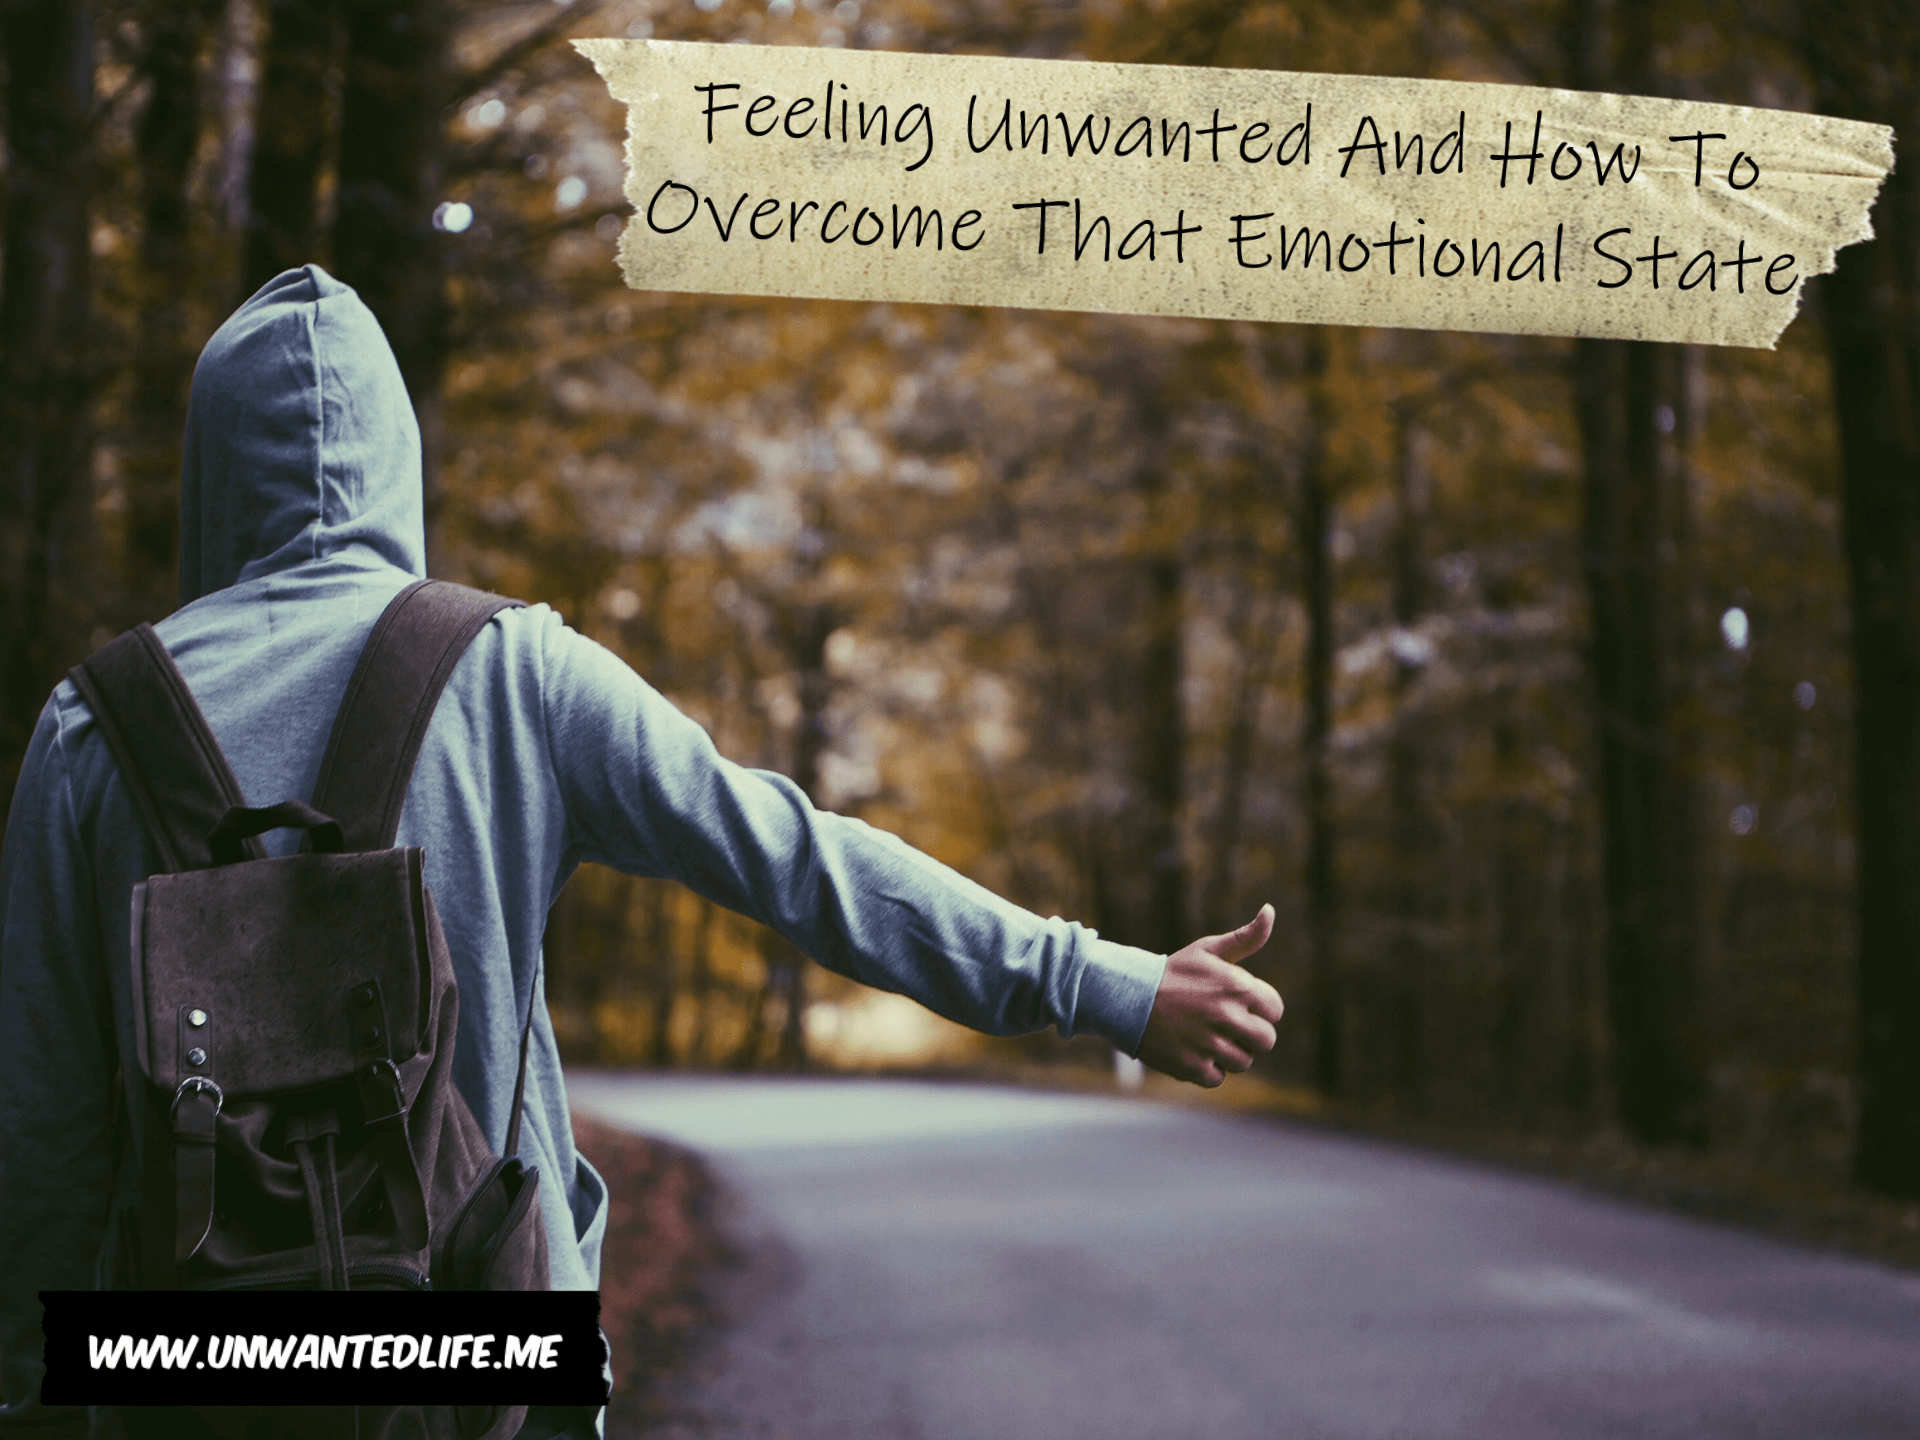 A picture of a person trying to hitchhike on an empty road running through the woods to represent the topic of the article - Feeling Unwanted And How To Overcome That Emotional State